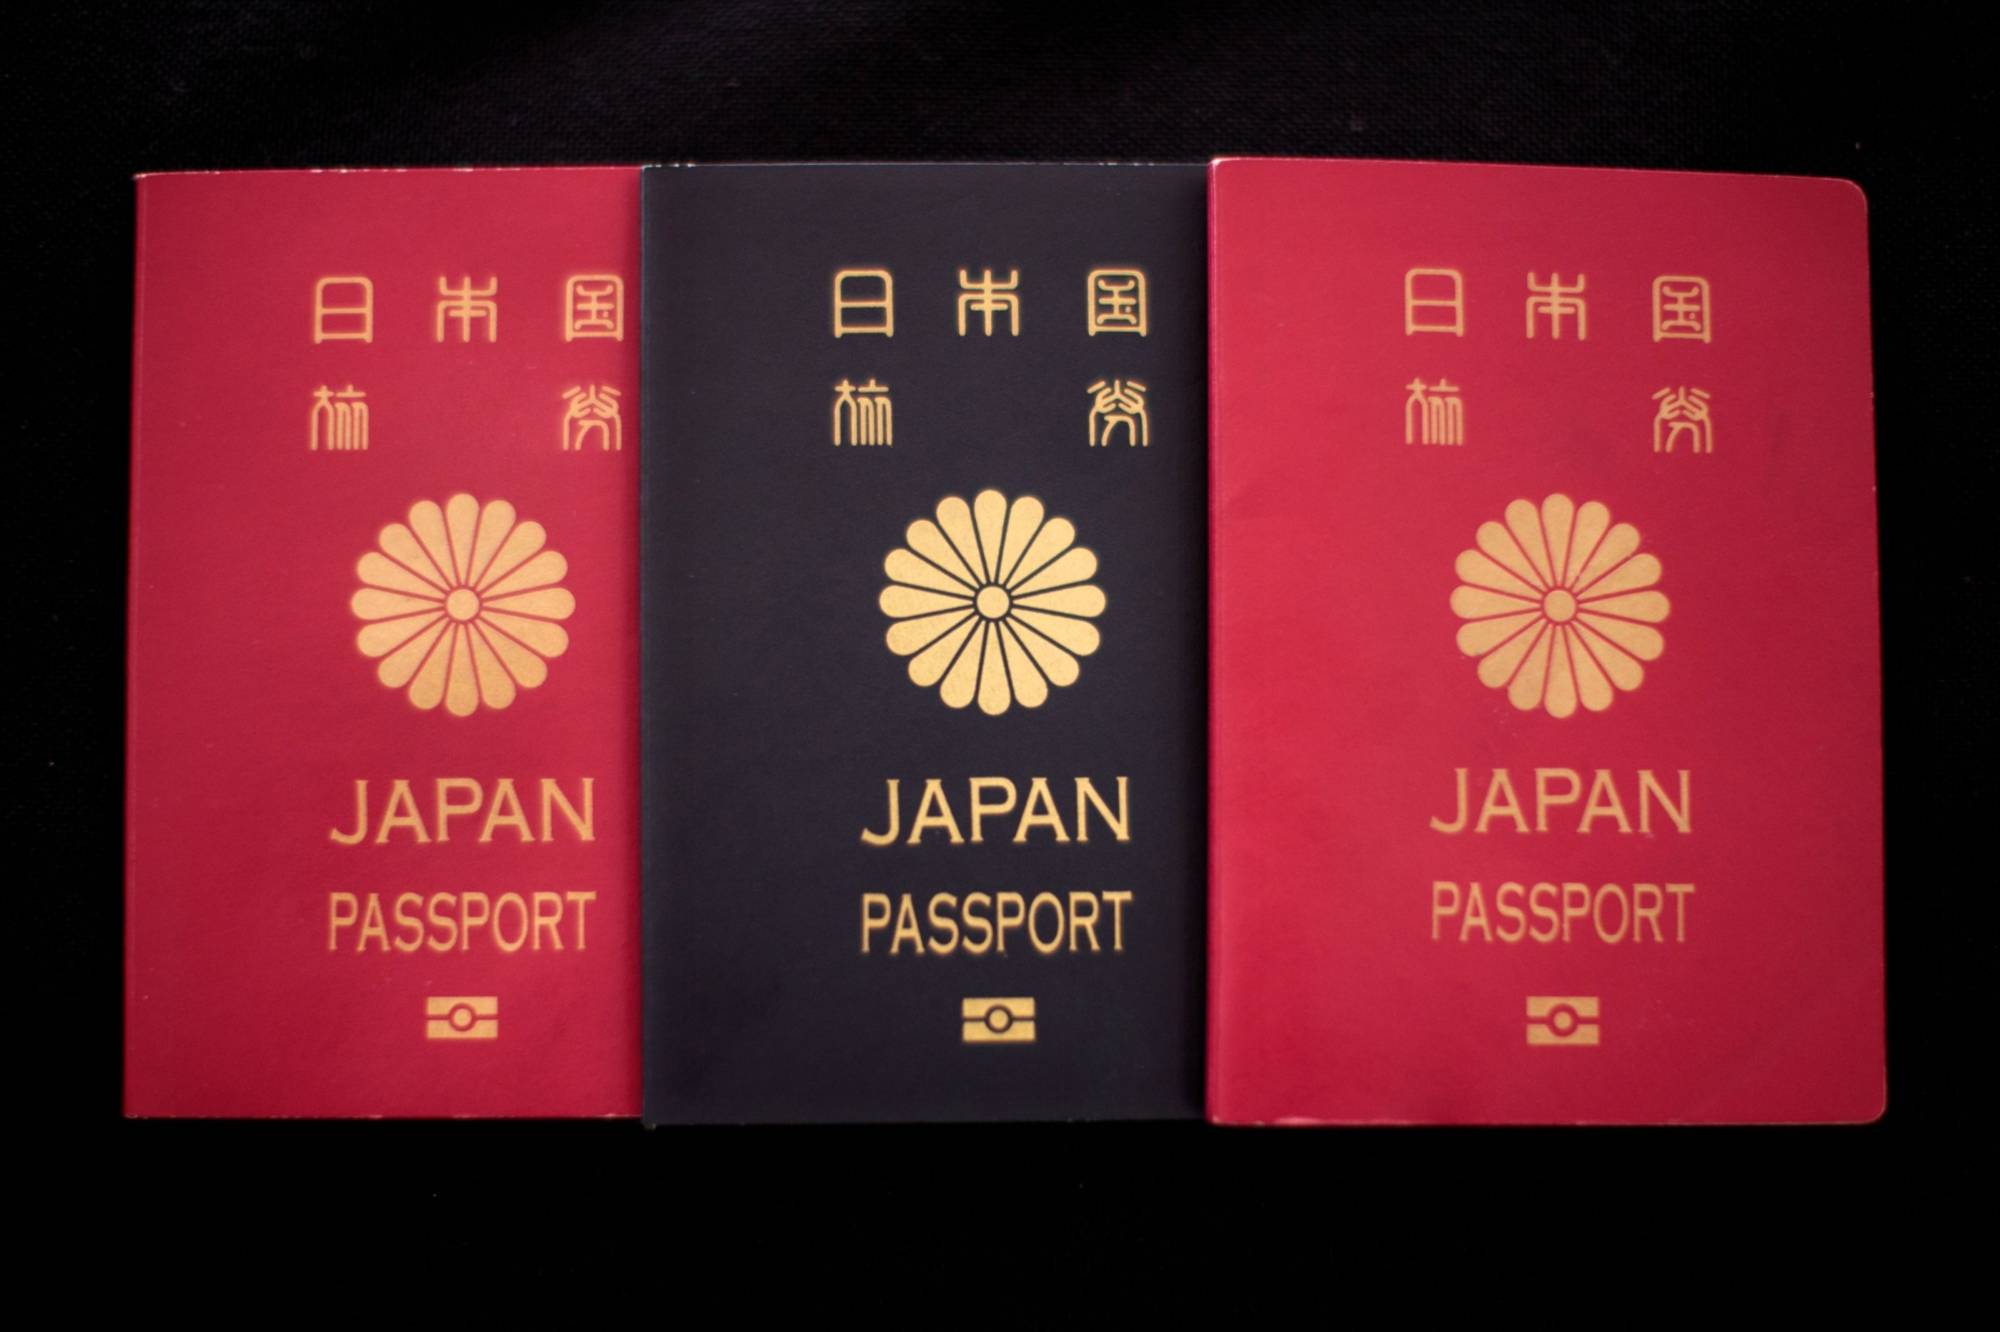 Japan has the strongest passport in the world according to new Henley &  Partners ranking - The Japan Times